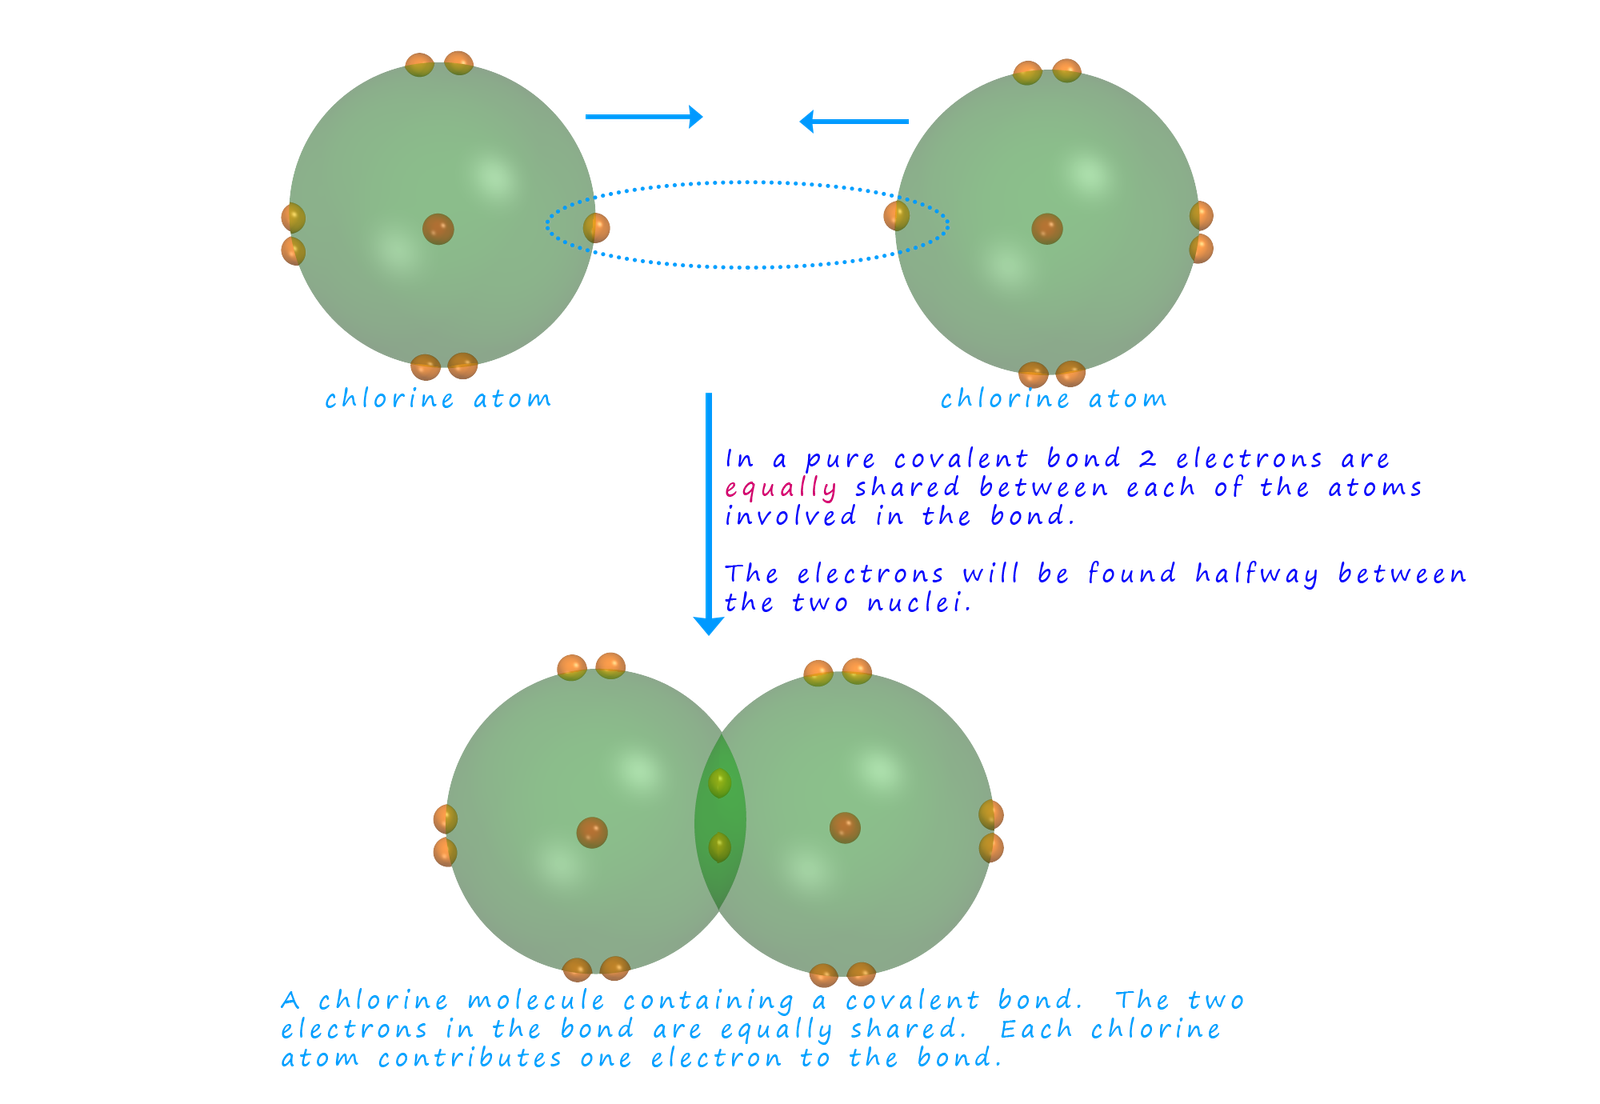 3D model showing how the electrons are shared in a covalent bond in a chlorine molecule.